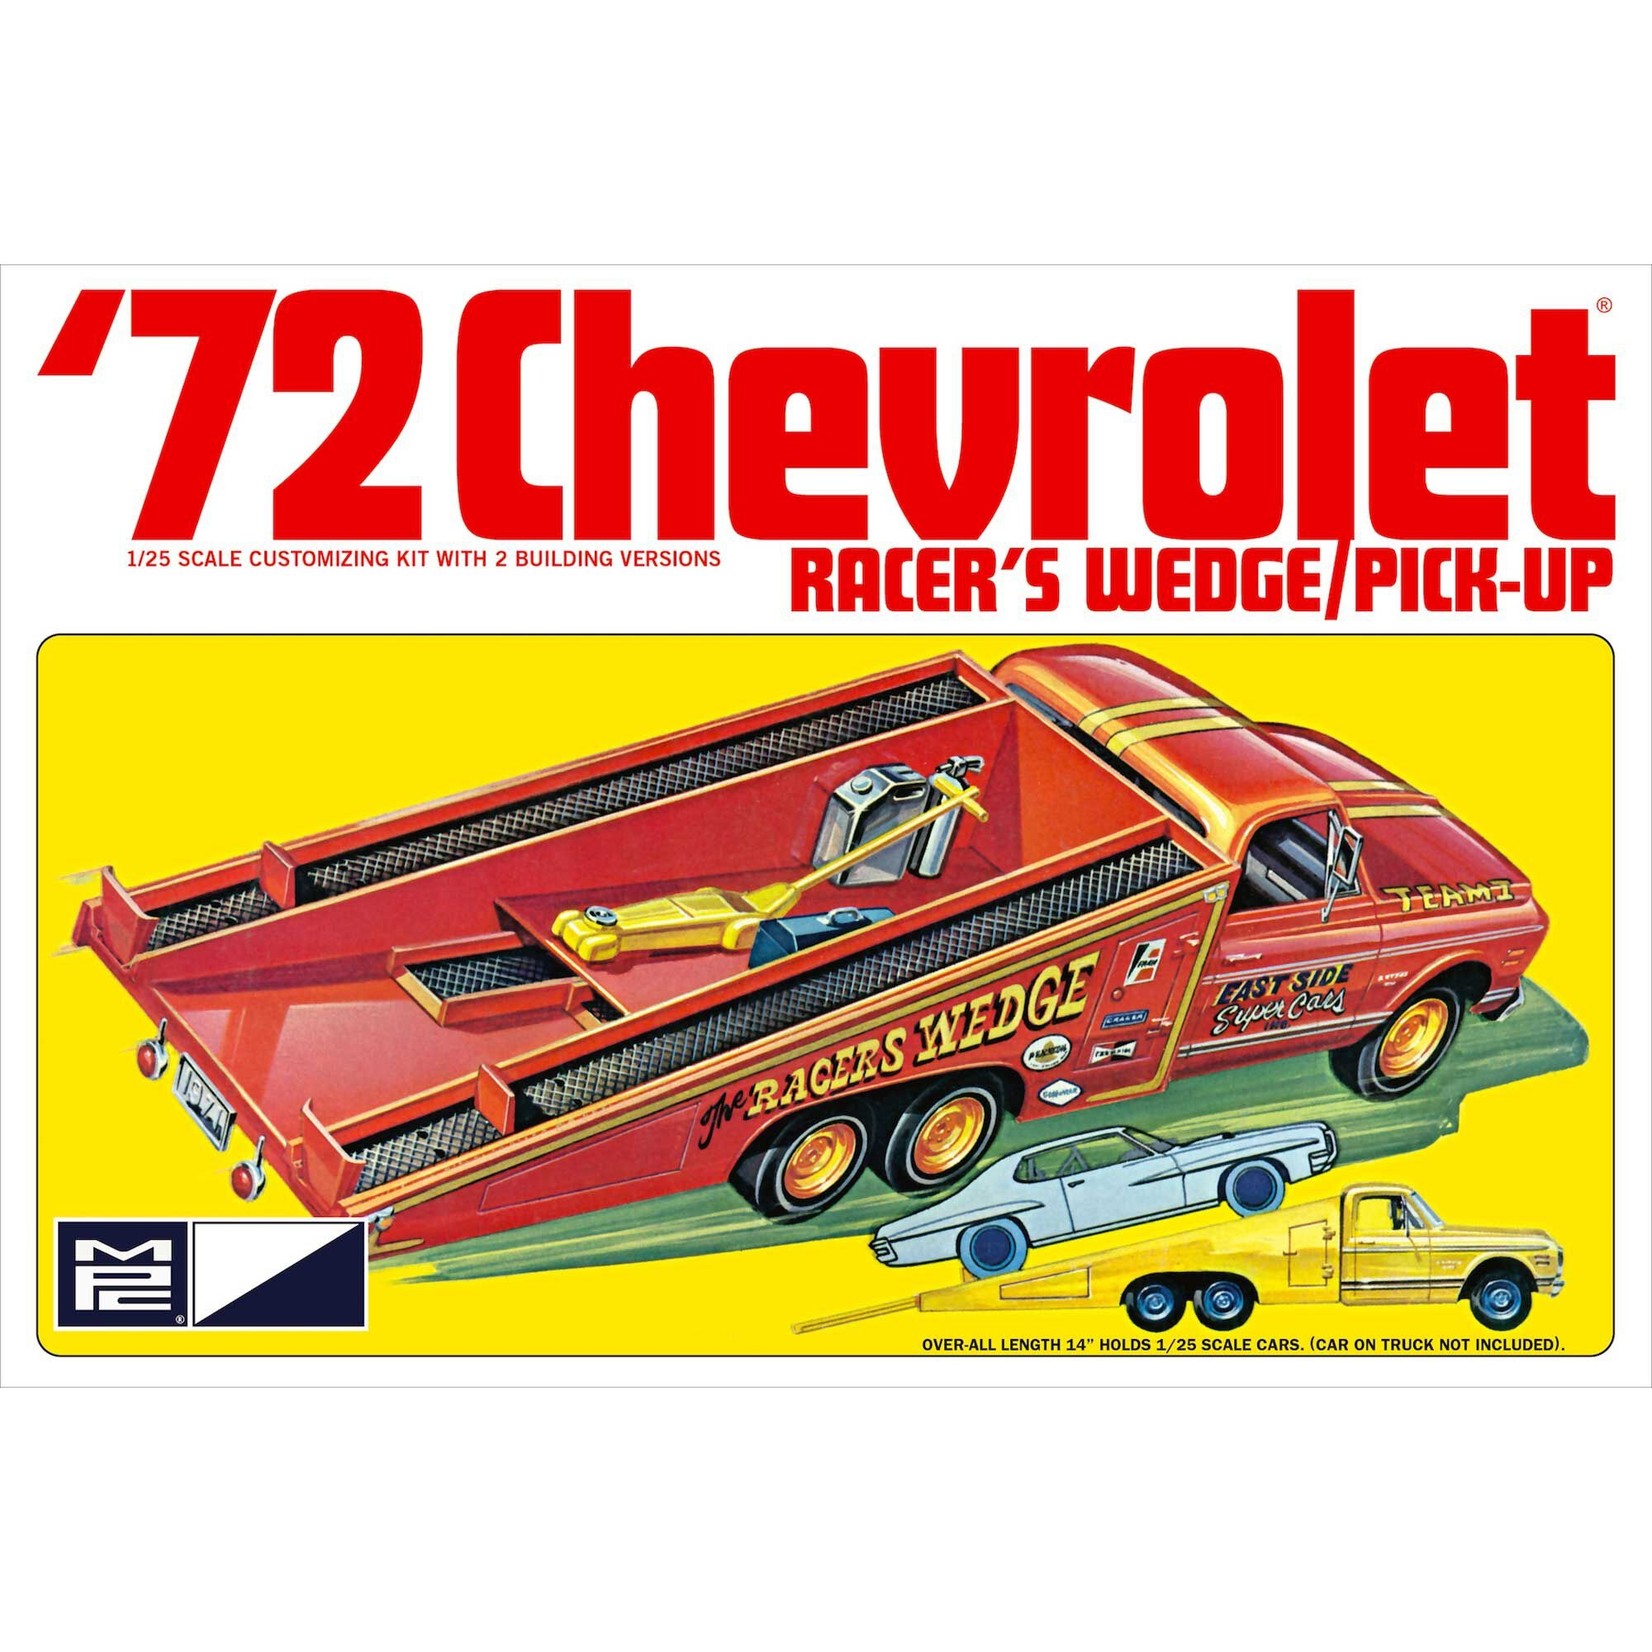 MPC 1/25 1972 Chevy Racer's Wedge Pick Up Model Kit